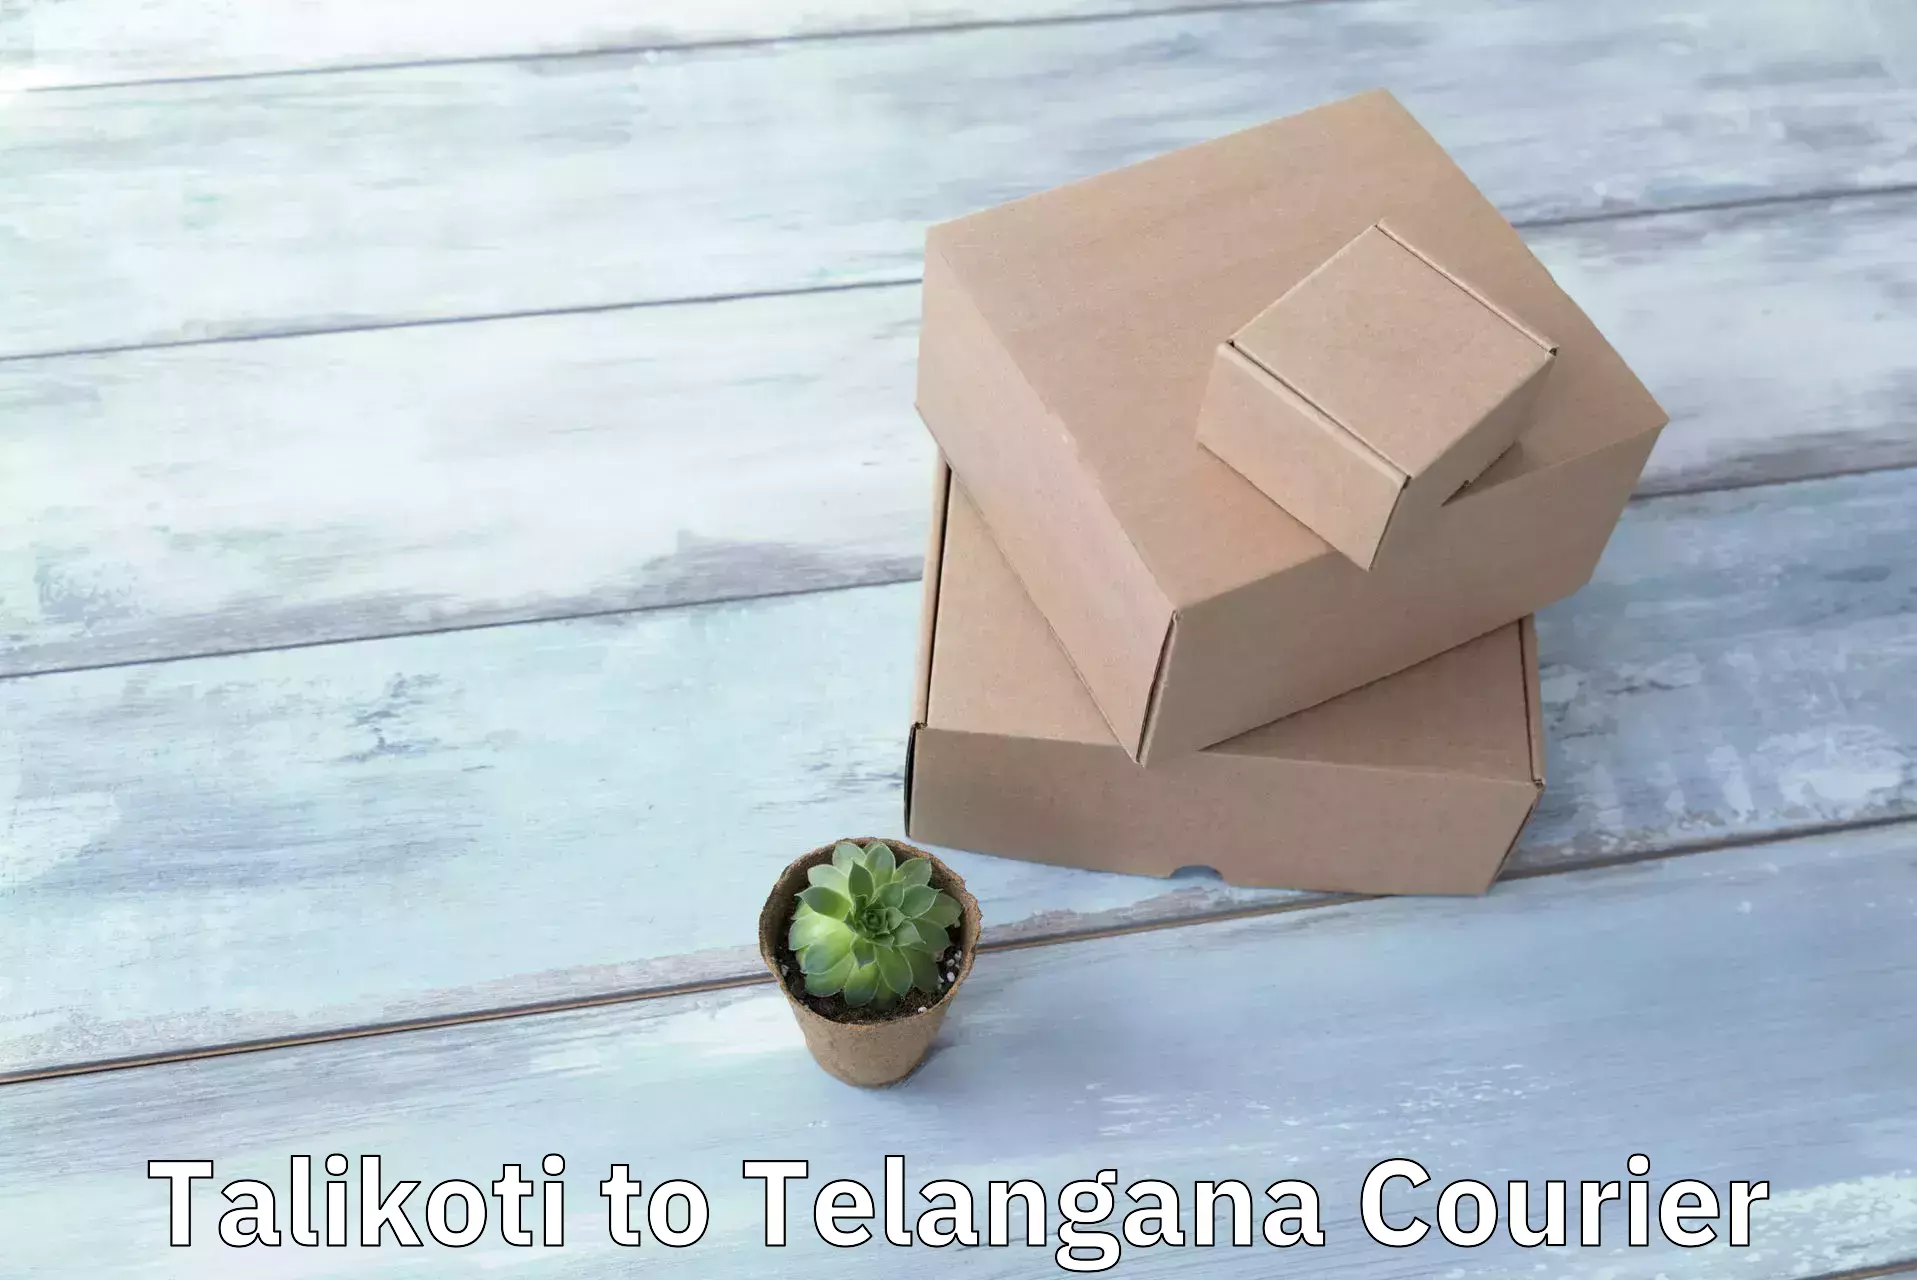 Cash on delivery service Talikoti to Warangal